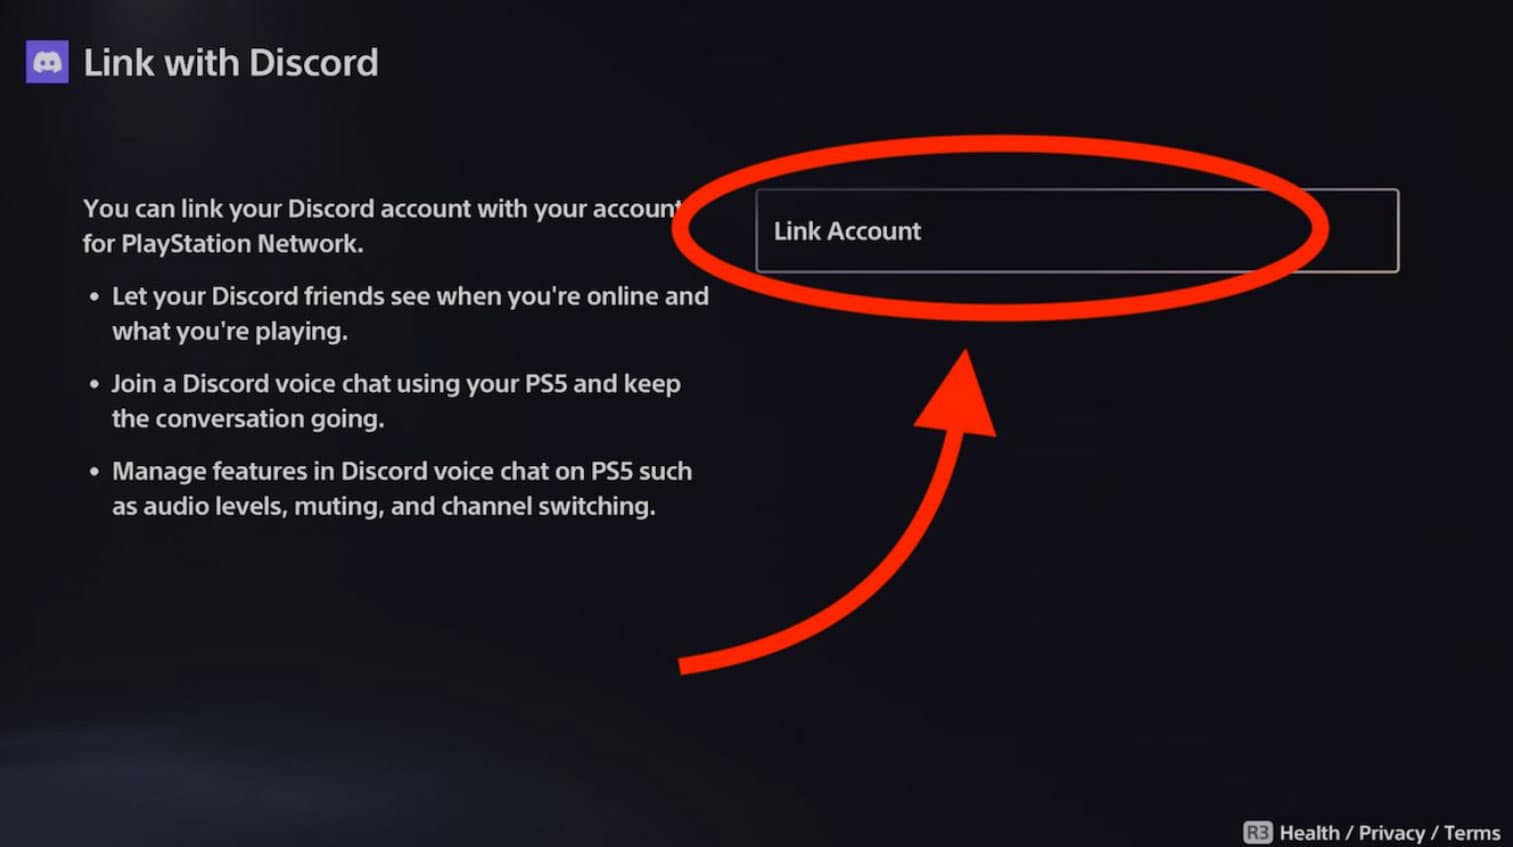 How to Connect Your Discord and PSN Accounts